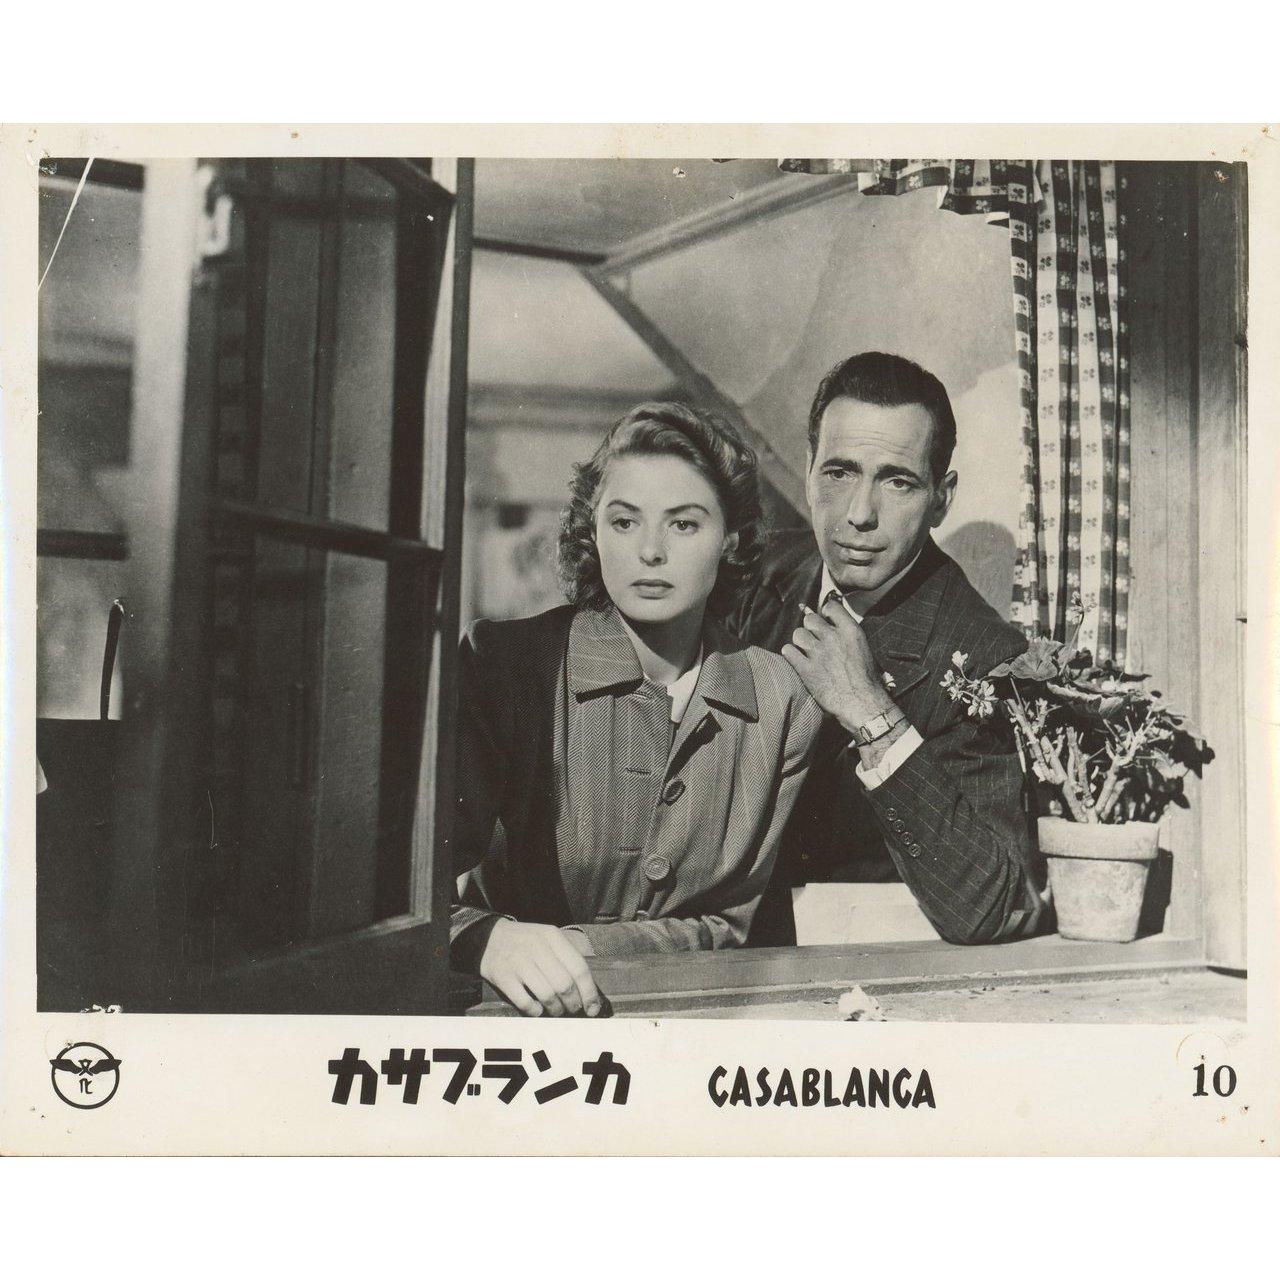 Original 1962 re-release Japanese silver gelatin single-weight photo for the 1942 film Casablanca directed by Michael Curtiz with Humphrey Bogart / Ingrid Bergman / Paul Henreid / Claude Rains. Very Good condition, pinholes. Please note: the size is